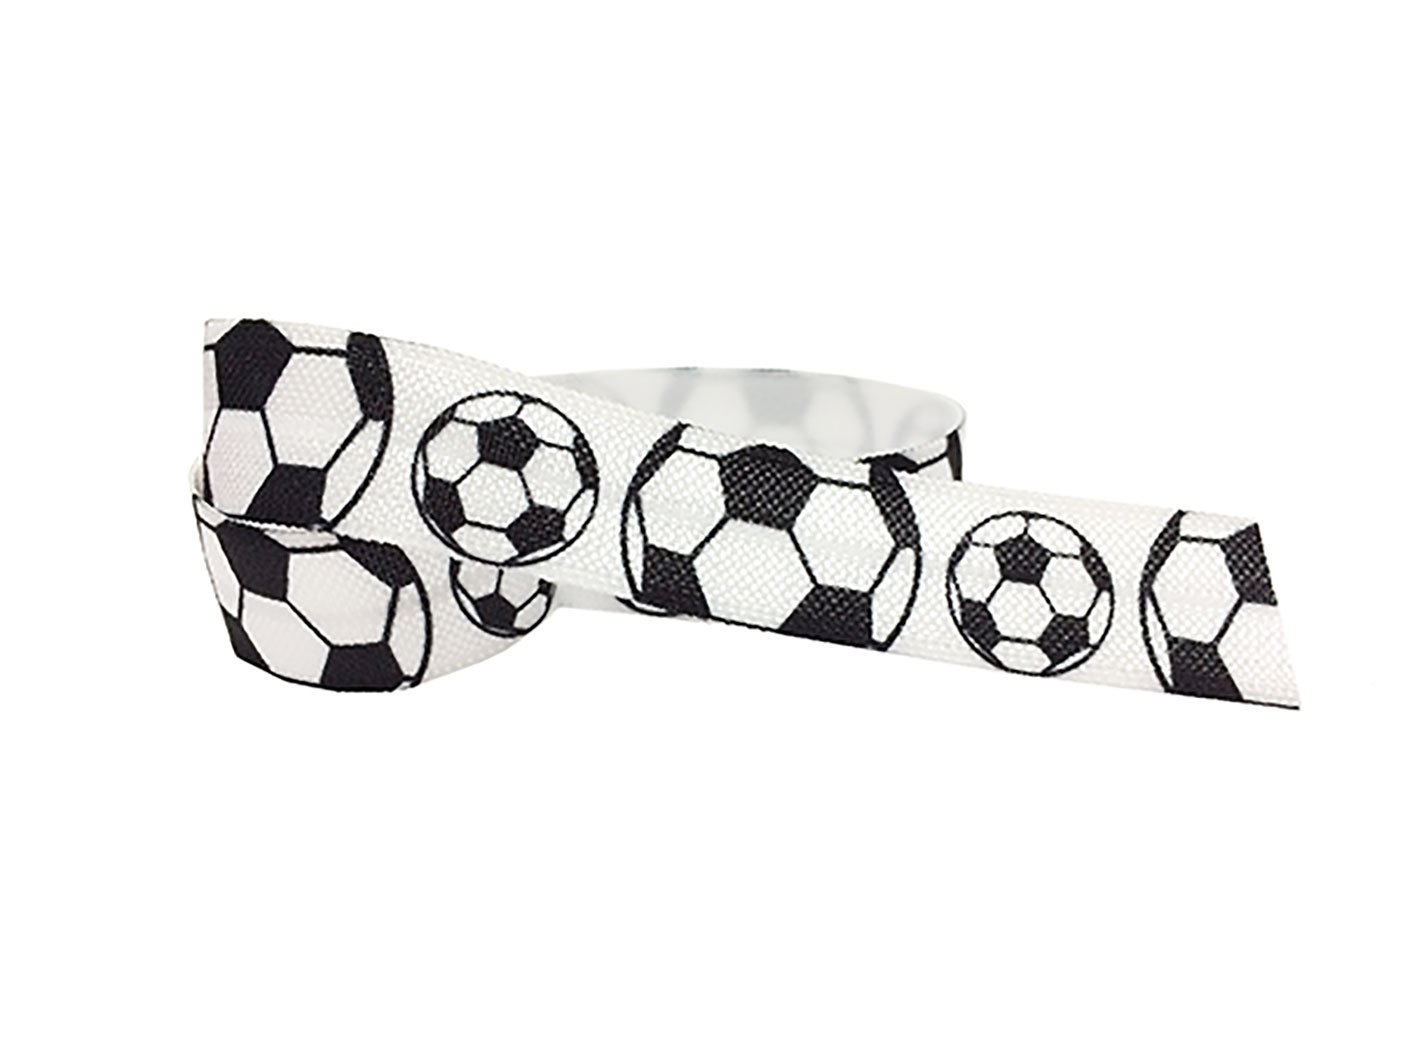 Black and White Football